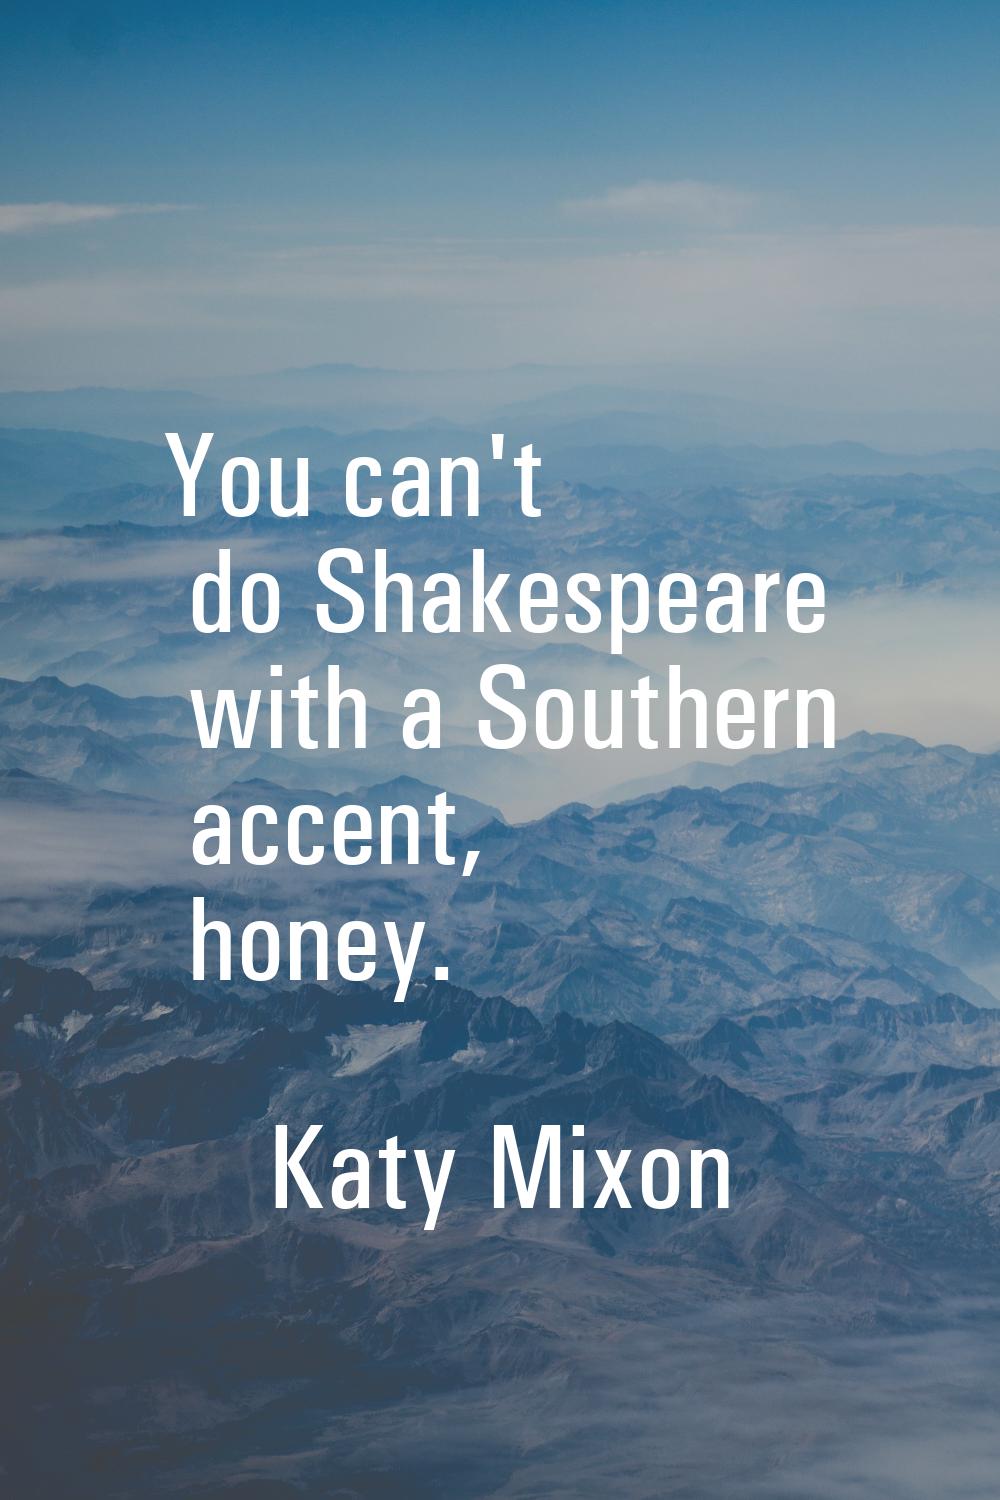 You can't do Shakespeare with a Southern accent, honey.